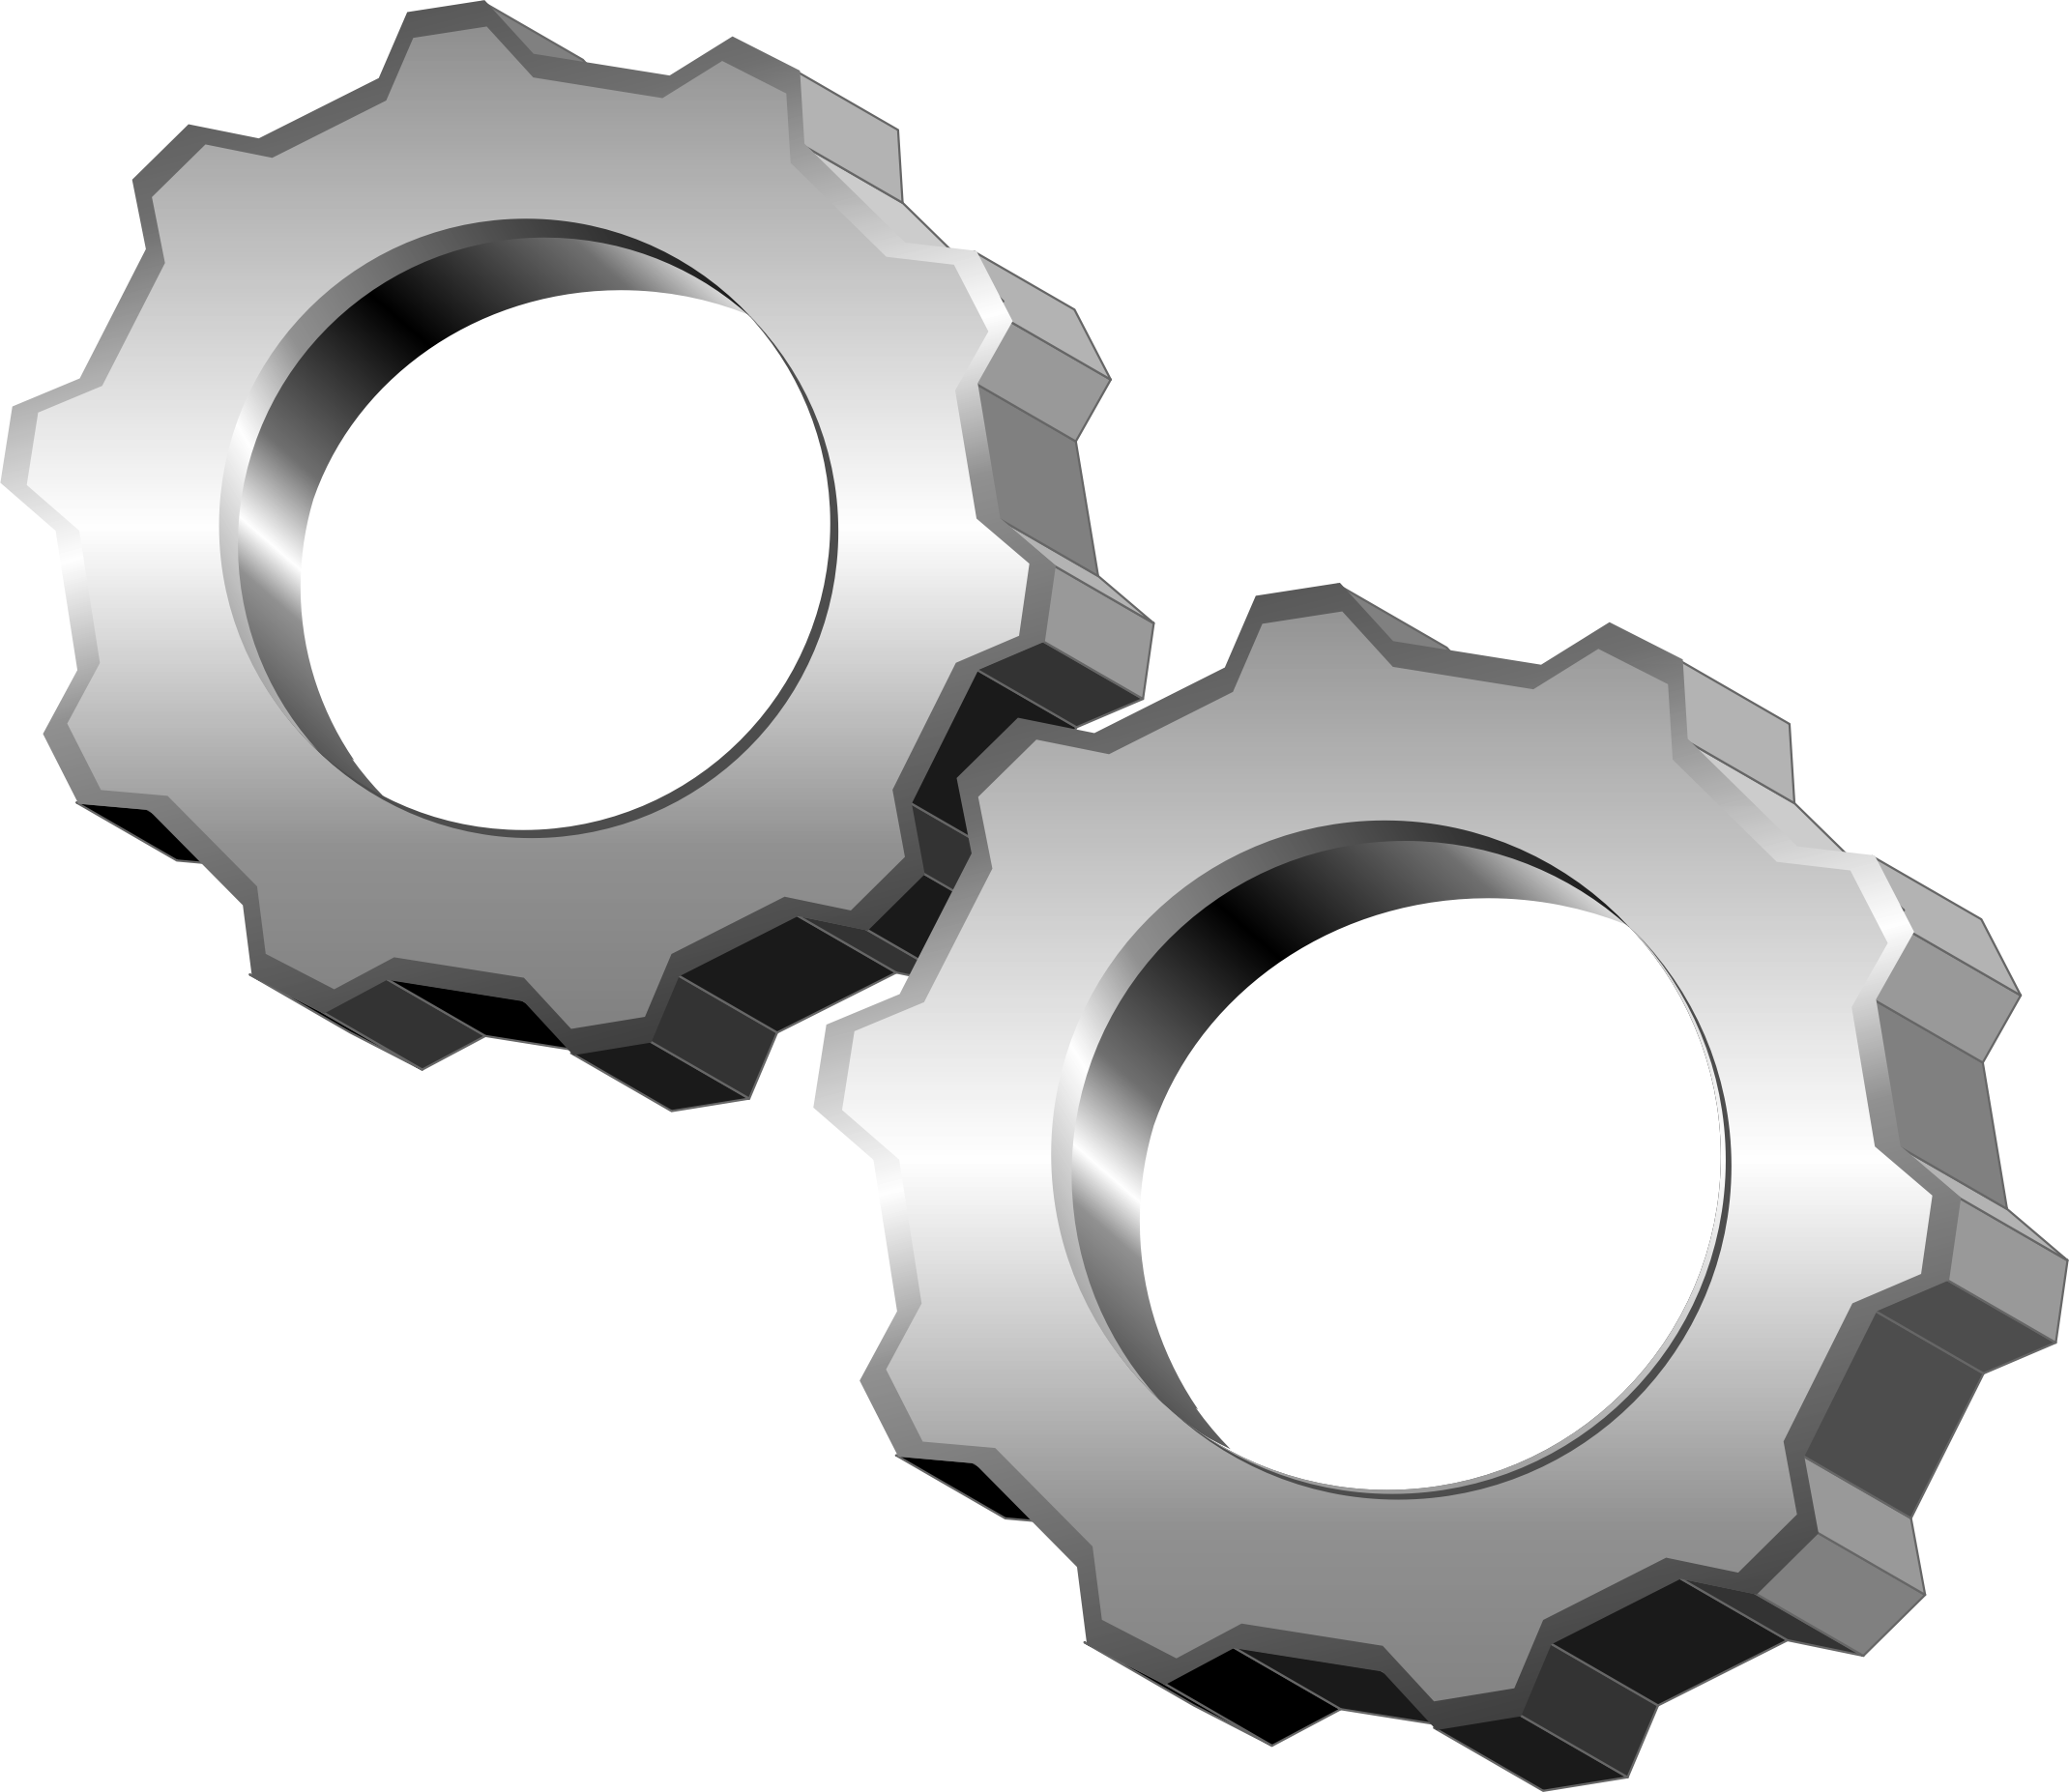 Big Image - Free Clipart Of Gears (2140x1854)